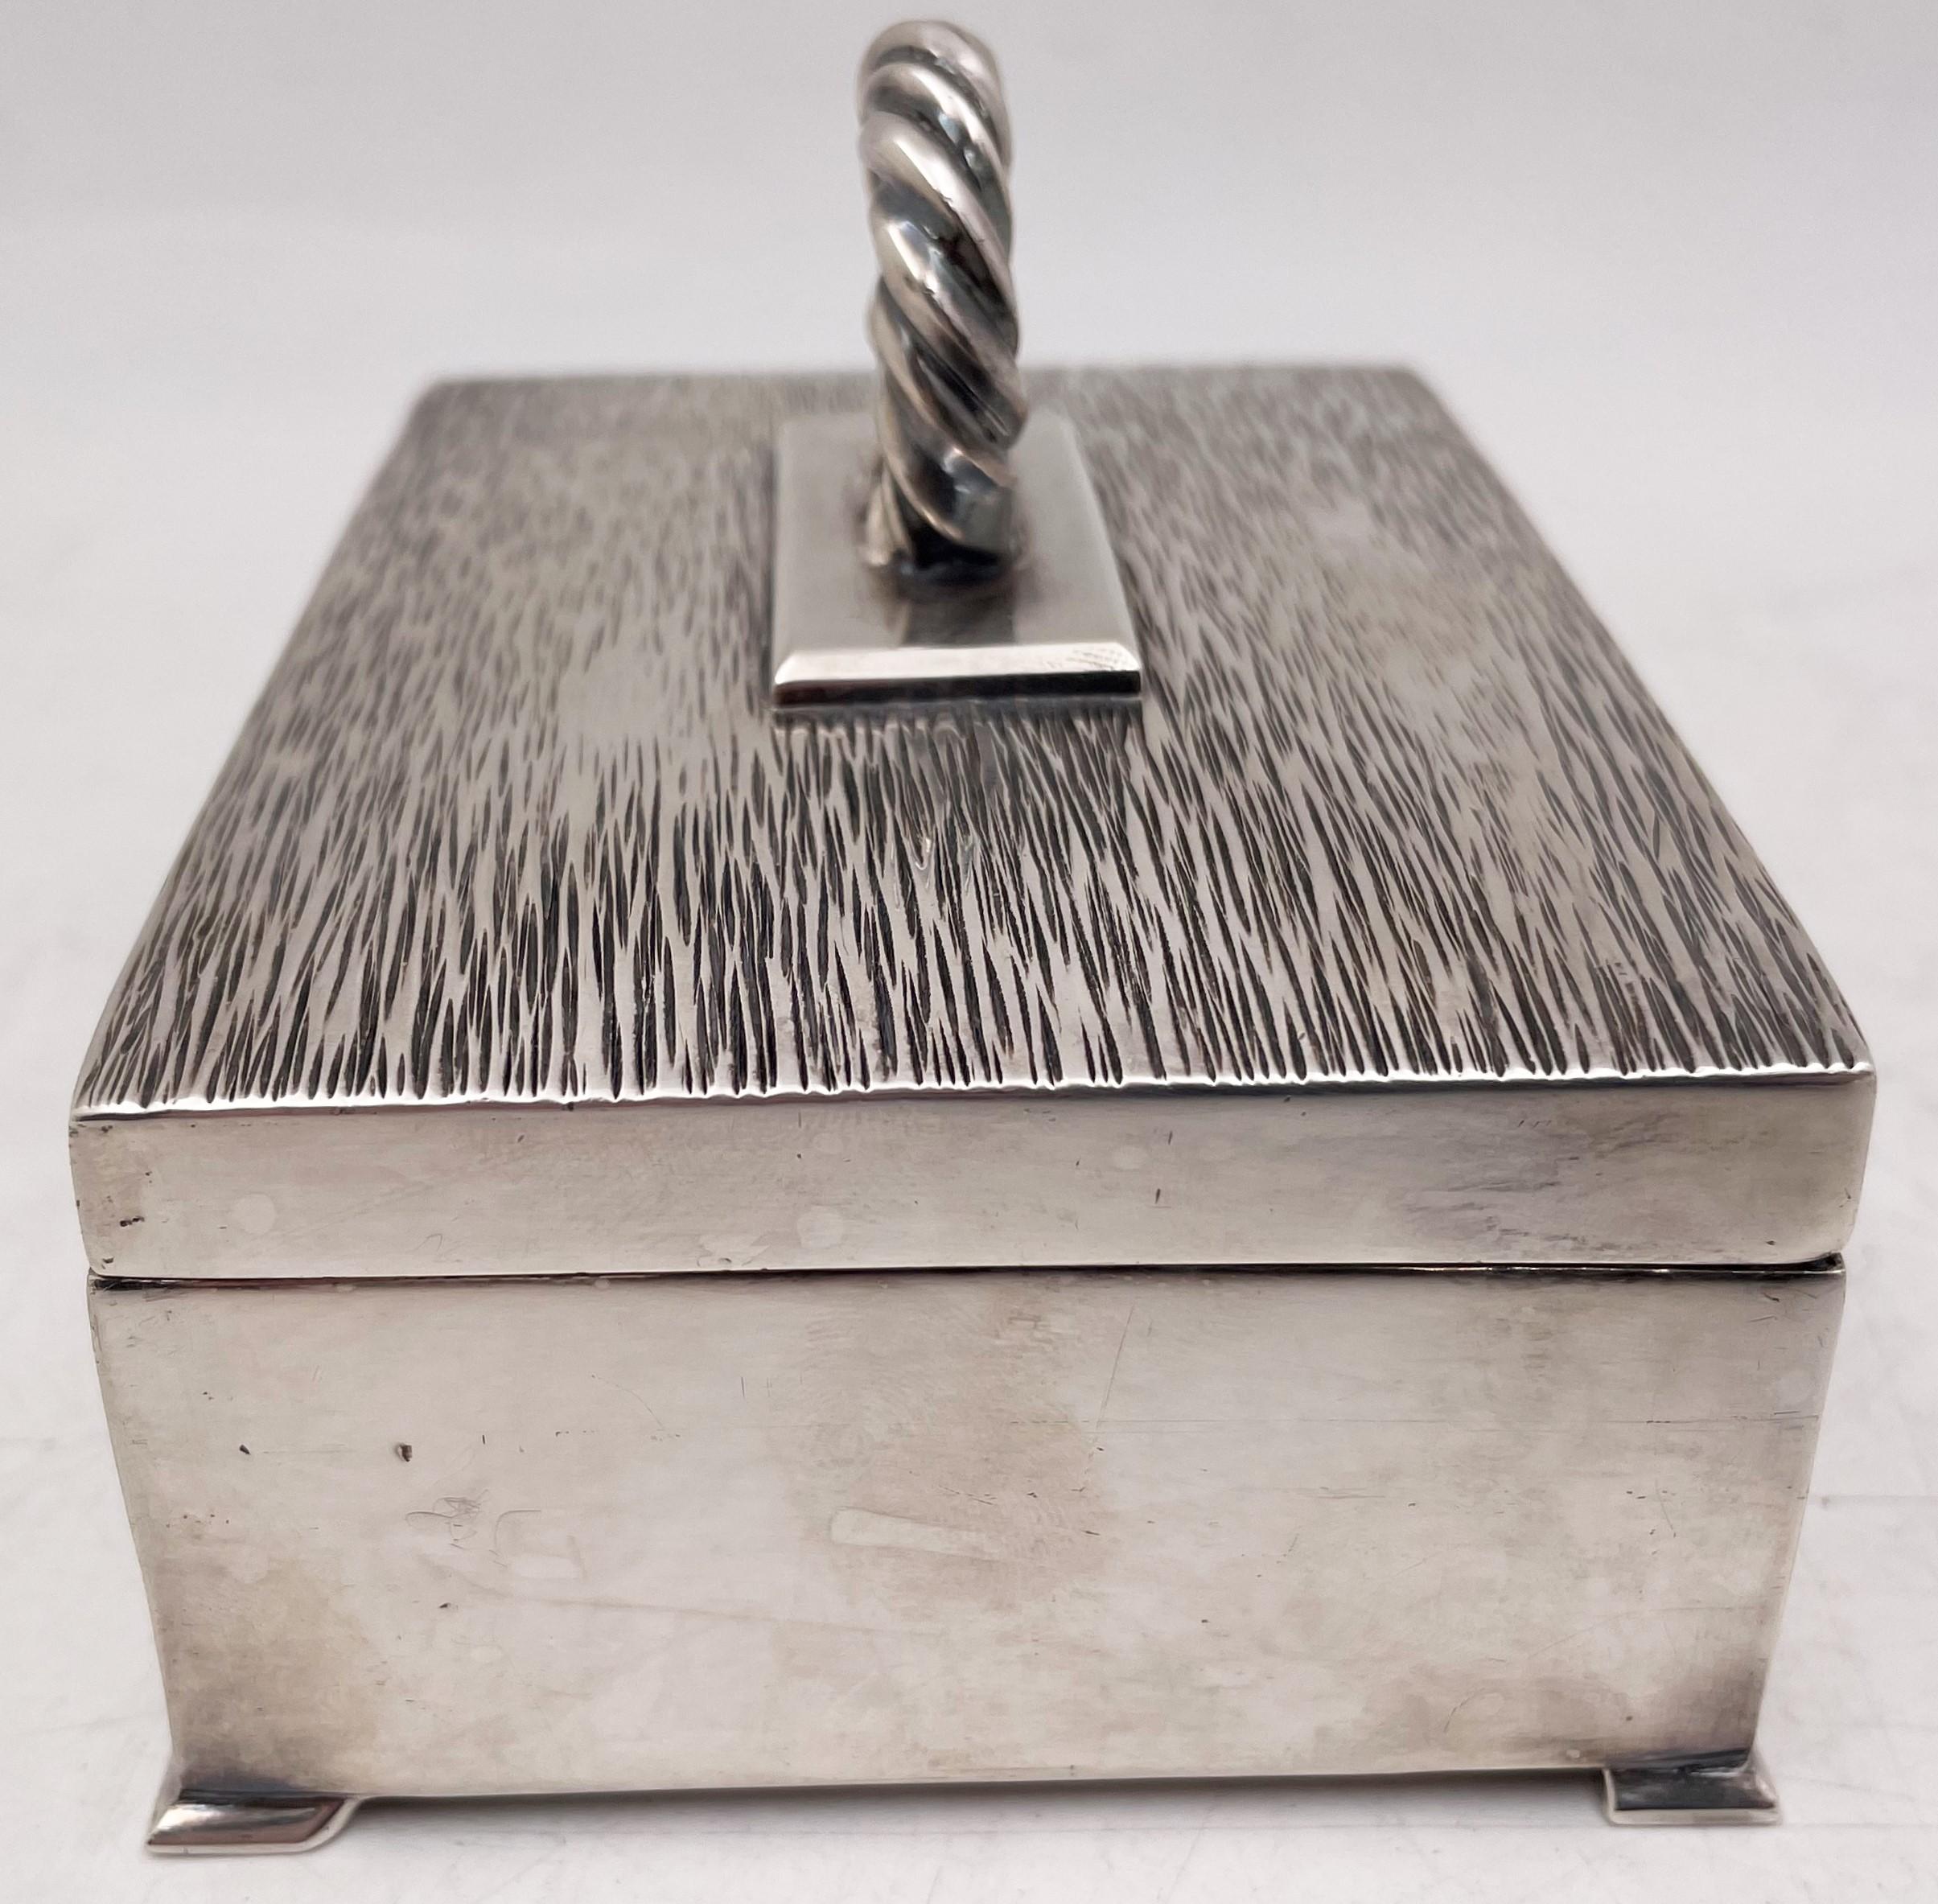 William Seitz sterling silver, handwrought box in Arts & Crafts style, with an engraved cover and a handle in rope style as well with a gilt interior, measuring 4 5/8'' in length by 3 3/8'' in width by 3'' in height, weighing 15.1 troy ounces, and